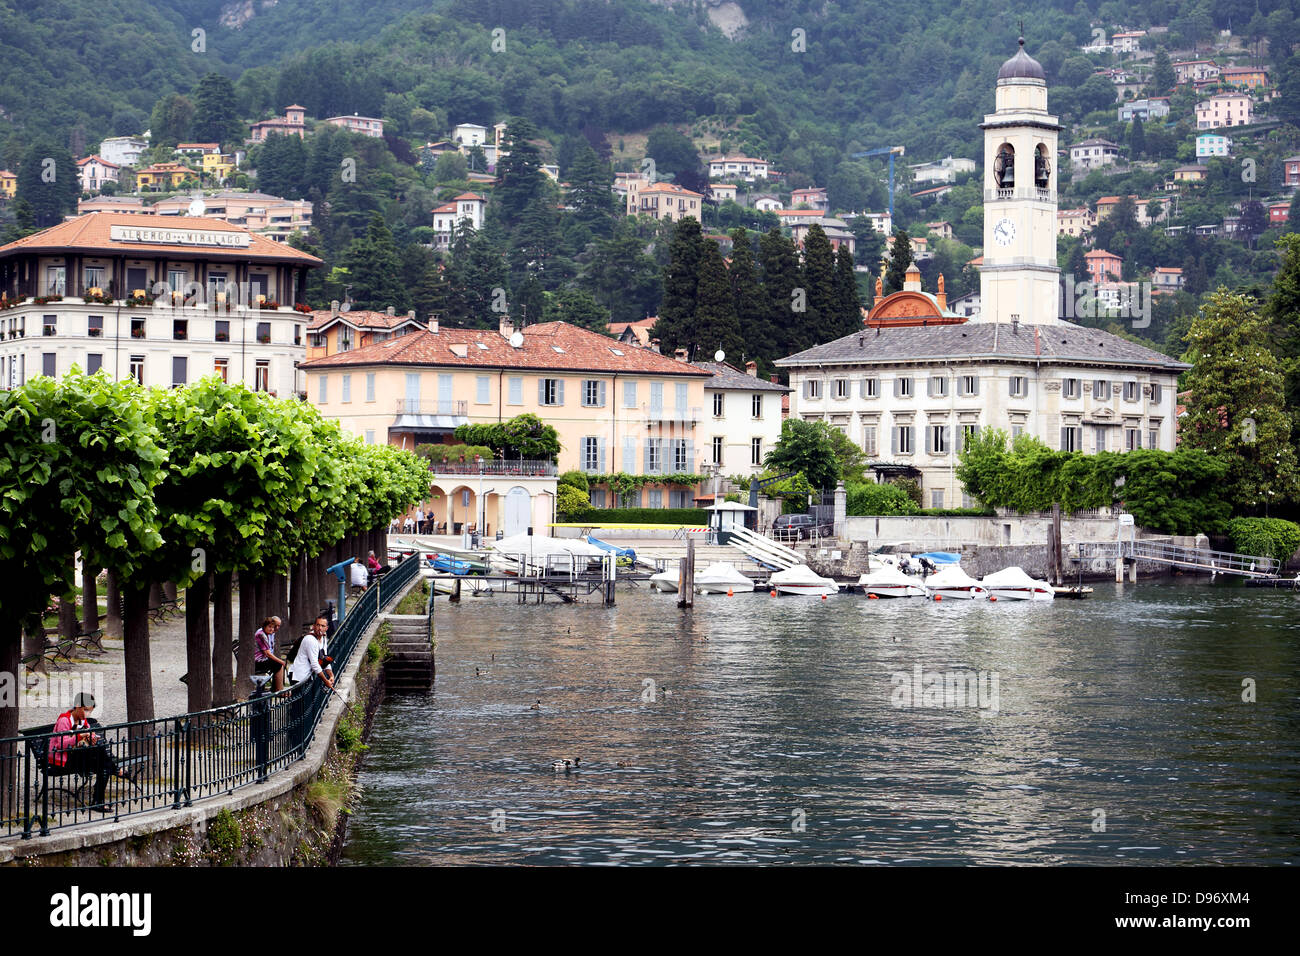 The village of Cernobbio on the shores of Lake Como in northern Italy Stock  Photo - Alamy